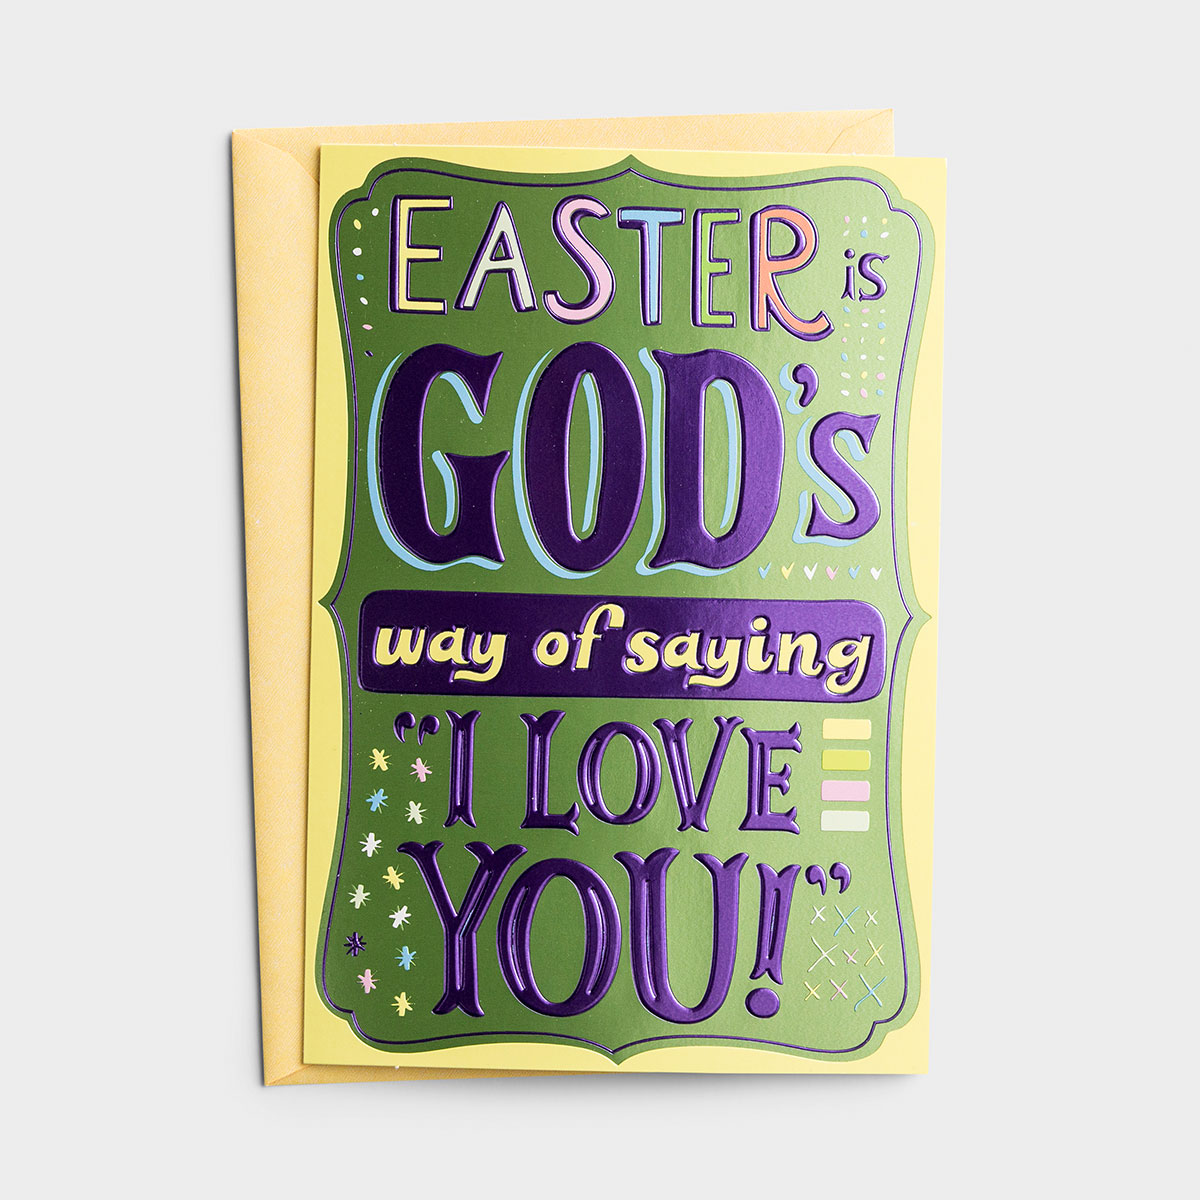 Share the meaning of Easter with a special child in your life with this DaySpring premium card.